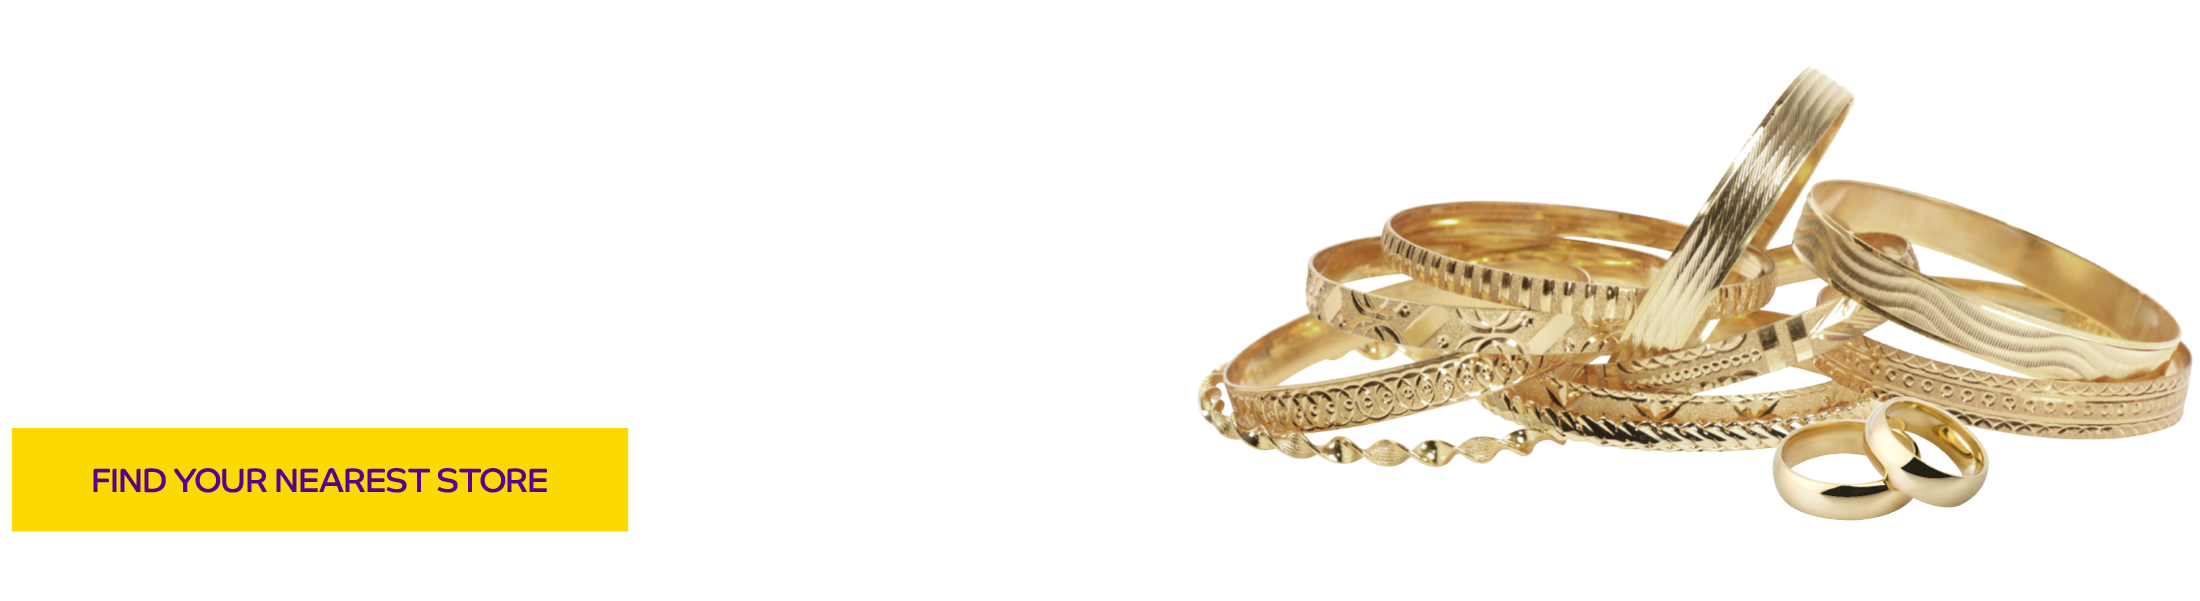 We buy and loan against gold